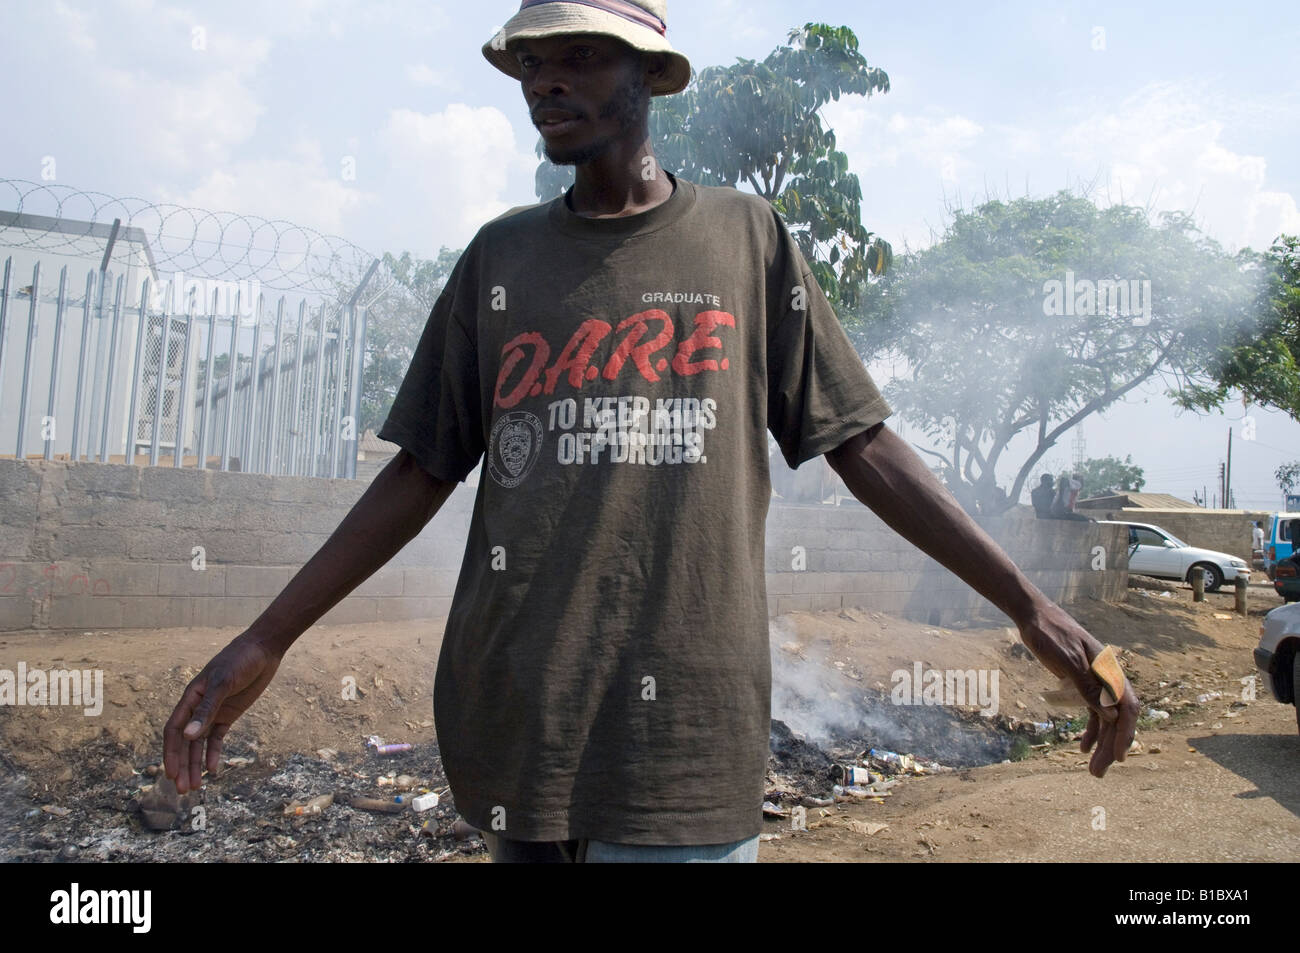 Man wearing T shirt with a message to keep kids off drugs, Lusaka Zambia Stock Photo